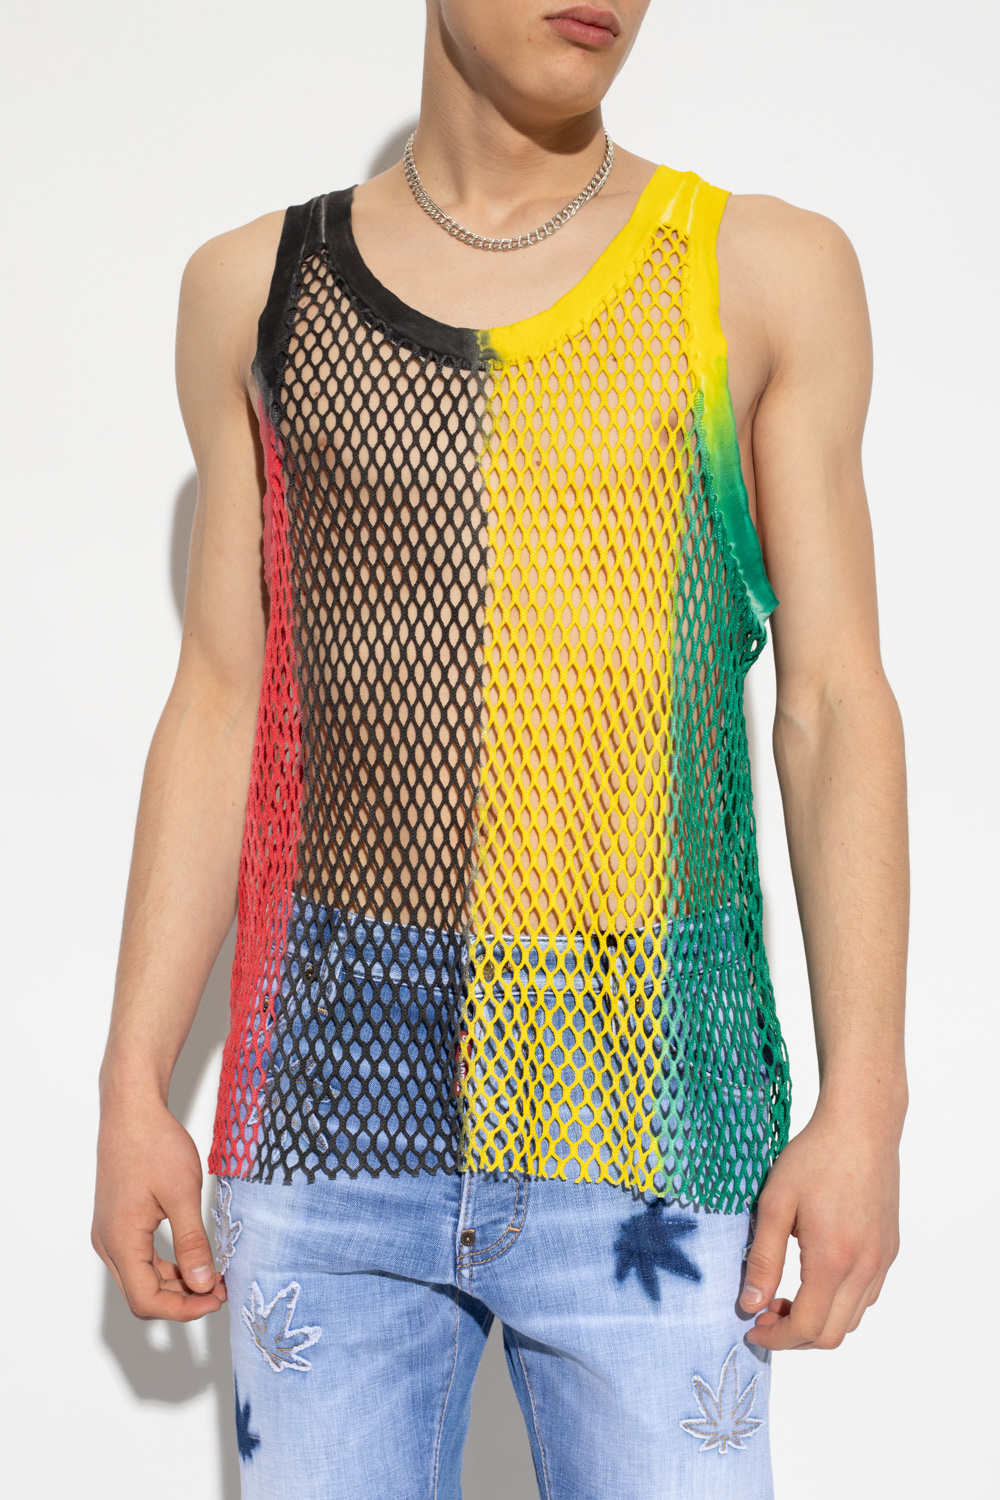 Dsquared2 Mesh top